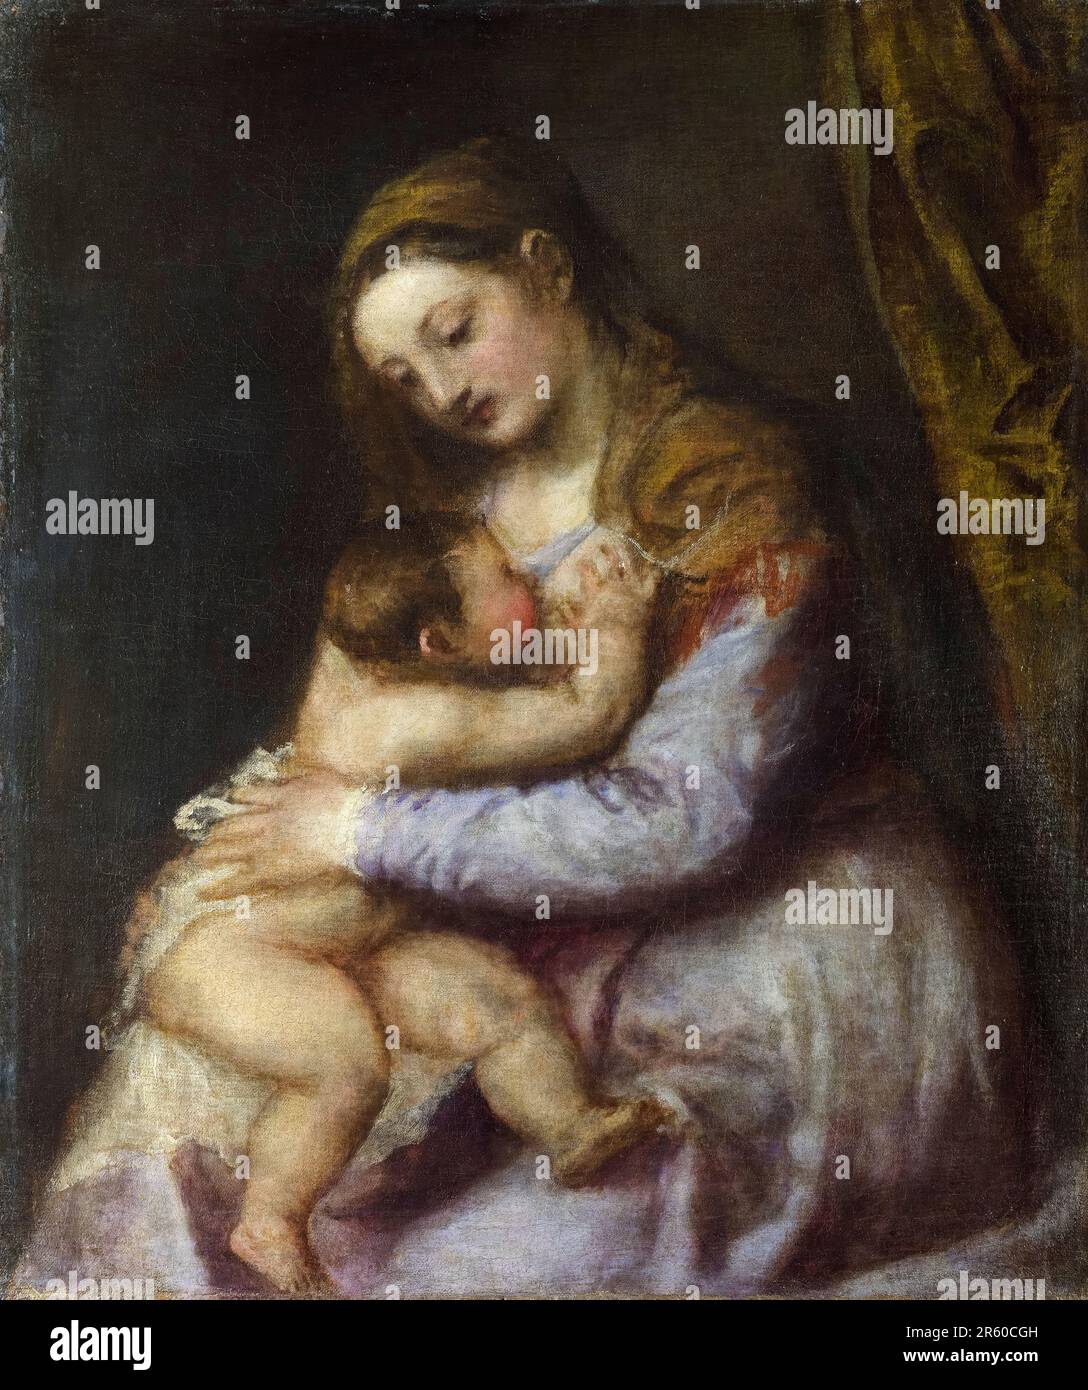 Titian, Tiziano Vecellio, The Virgin suckling the Infant Christ, painting in oil on canvas, 1565-1575 Stock Photo